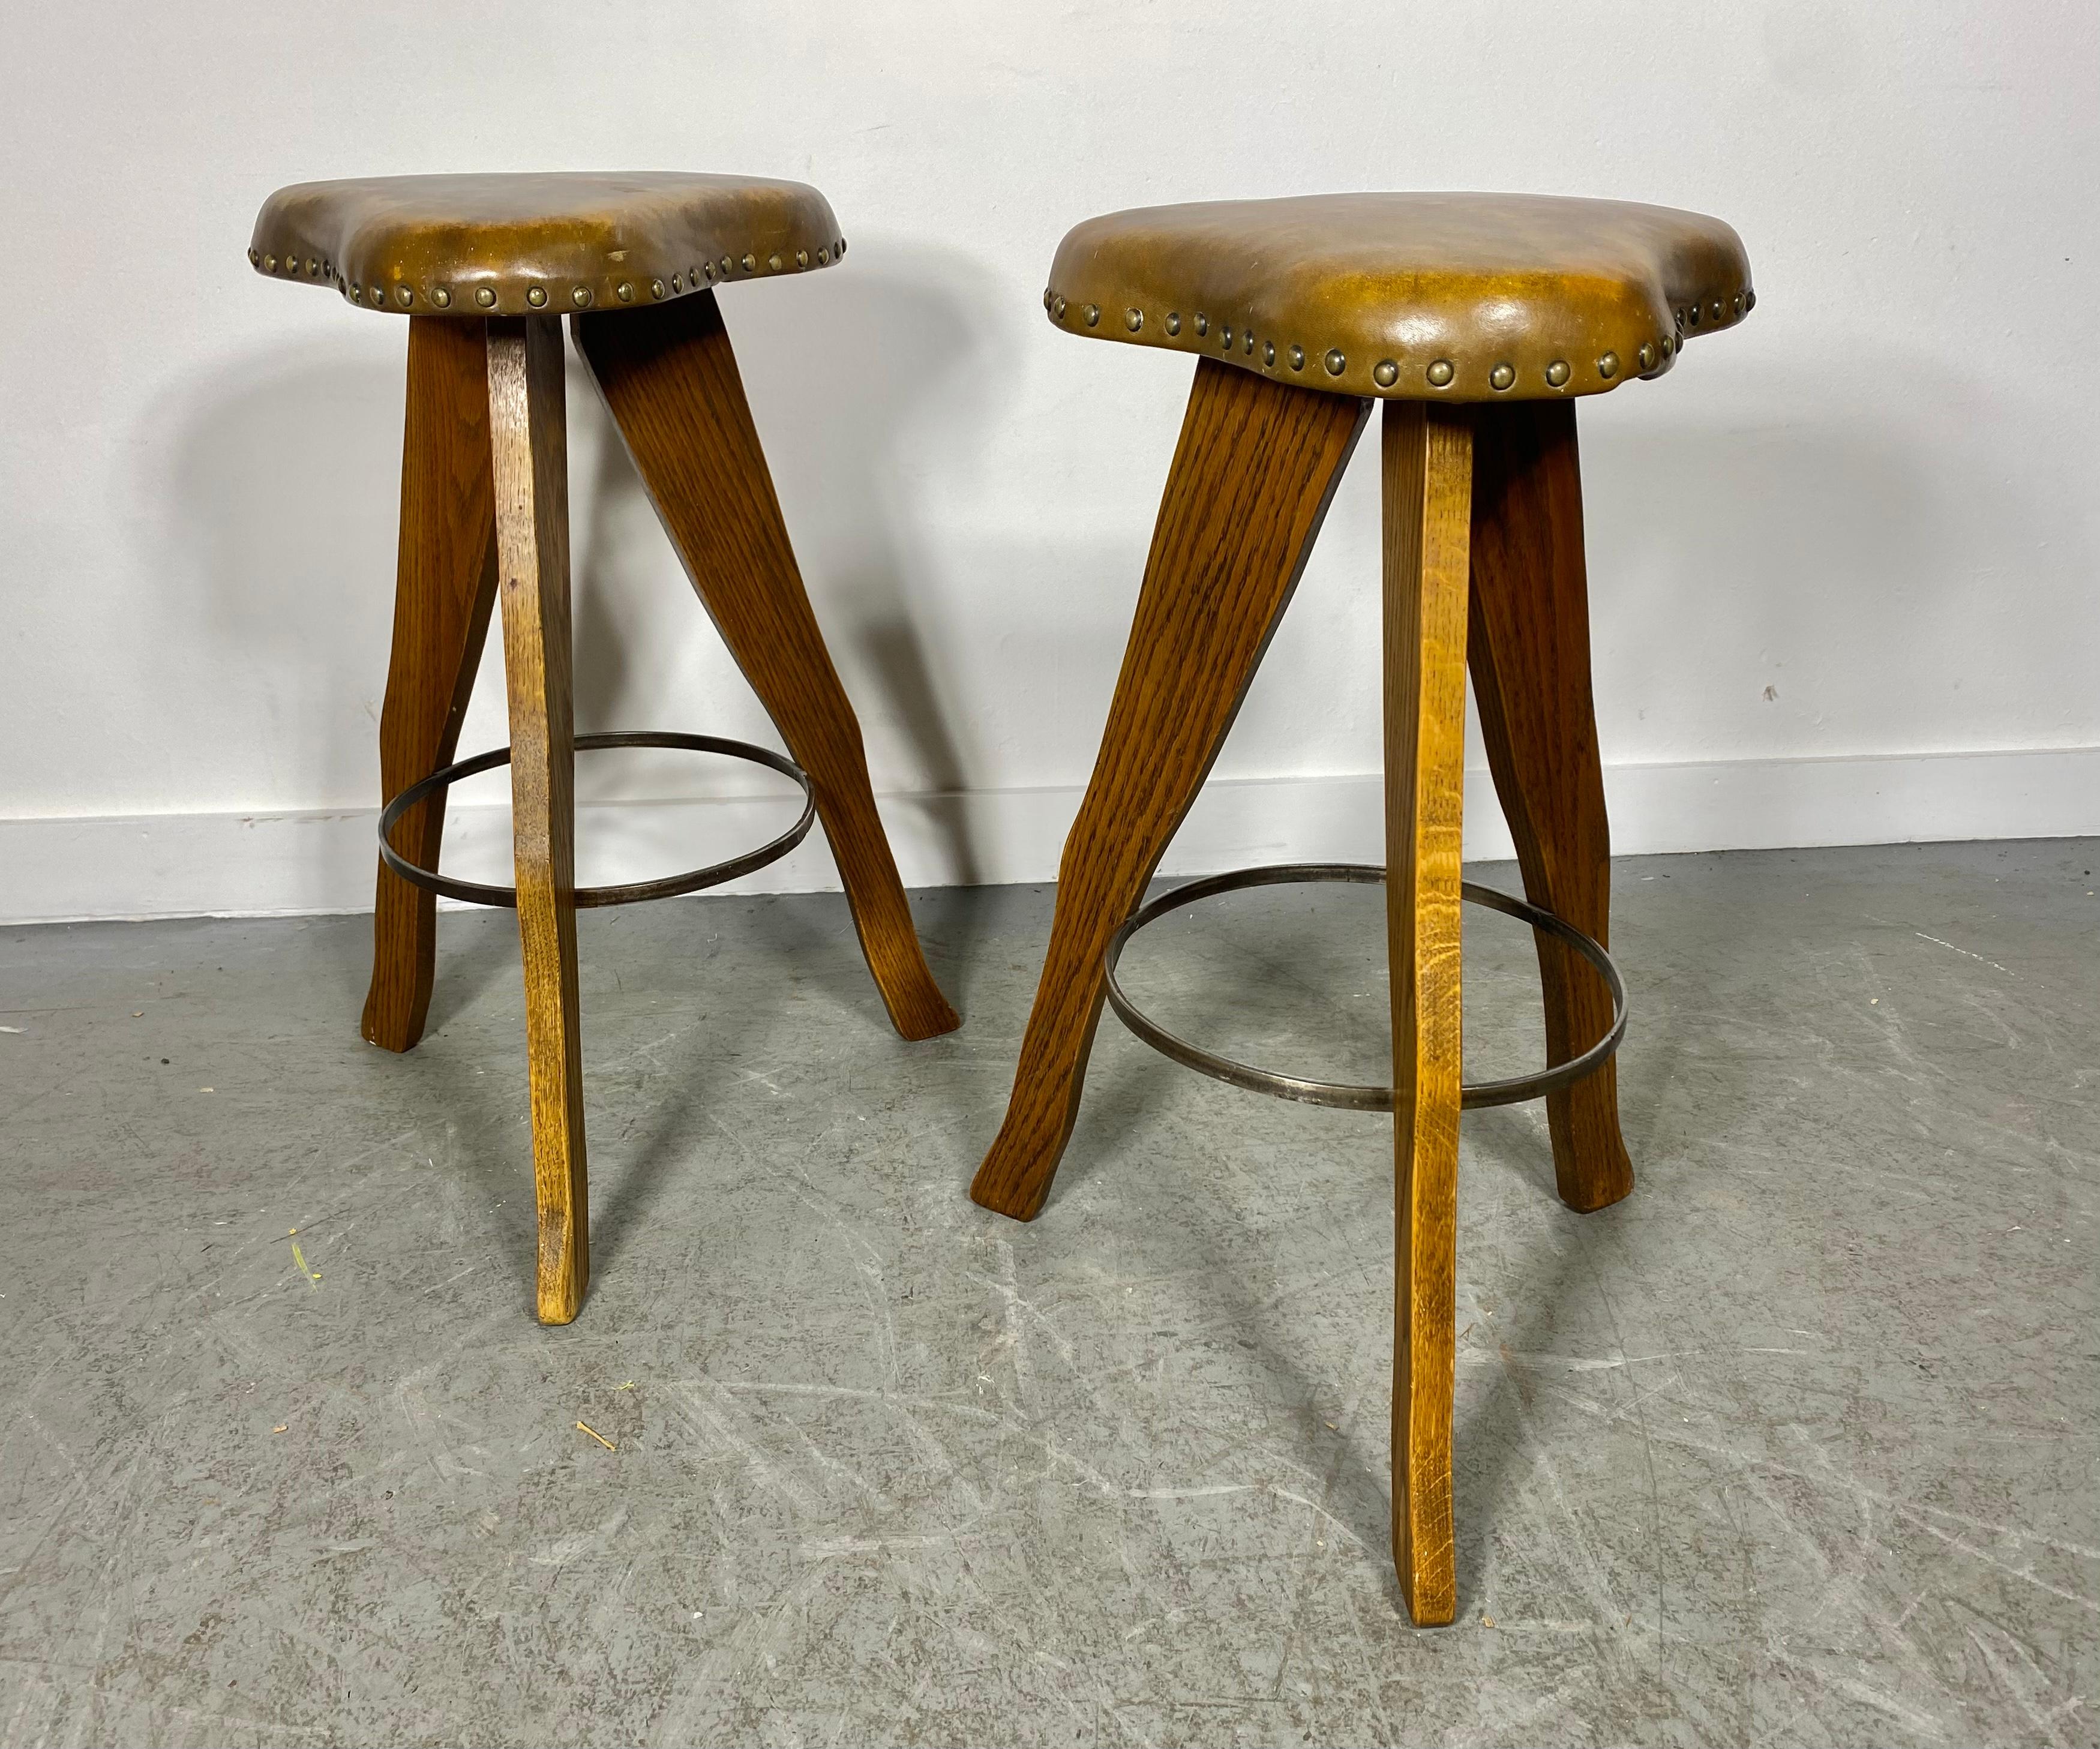 Unusual Rustic / Modern Farmhouse Oak and Leather Stools, Clover Shape Tops For Sale 2